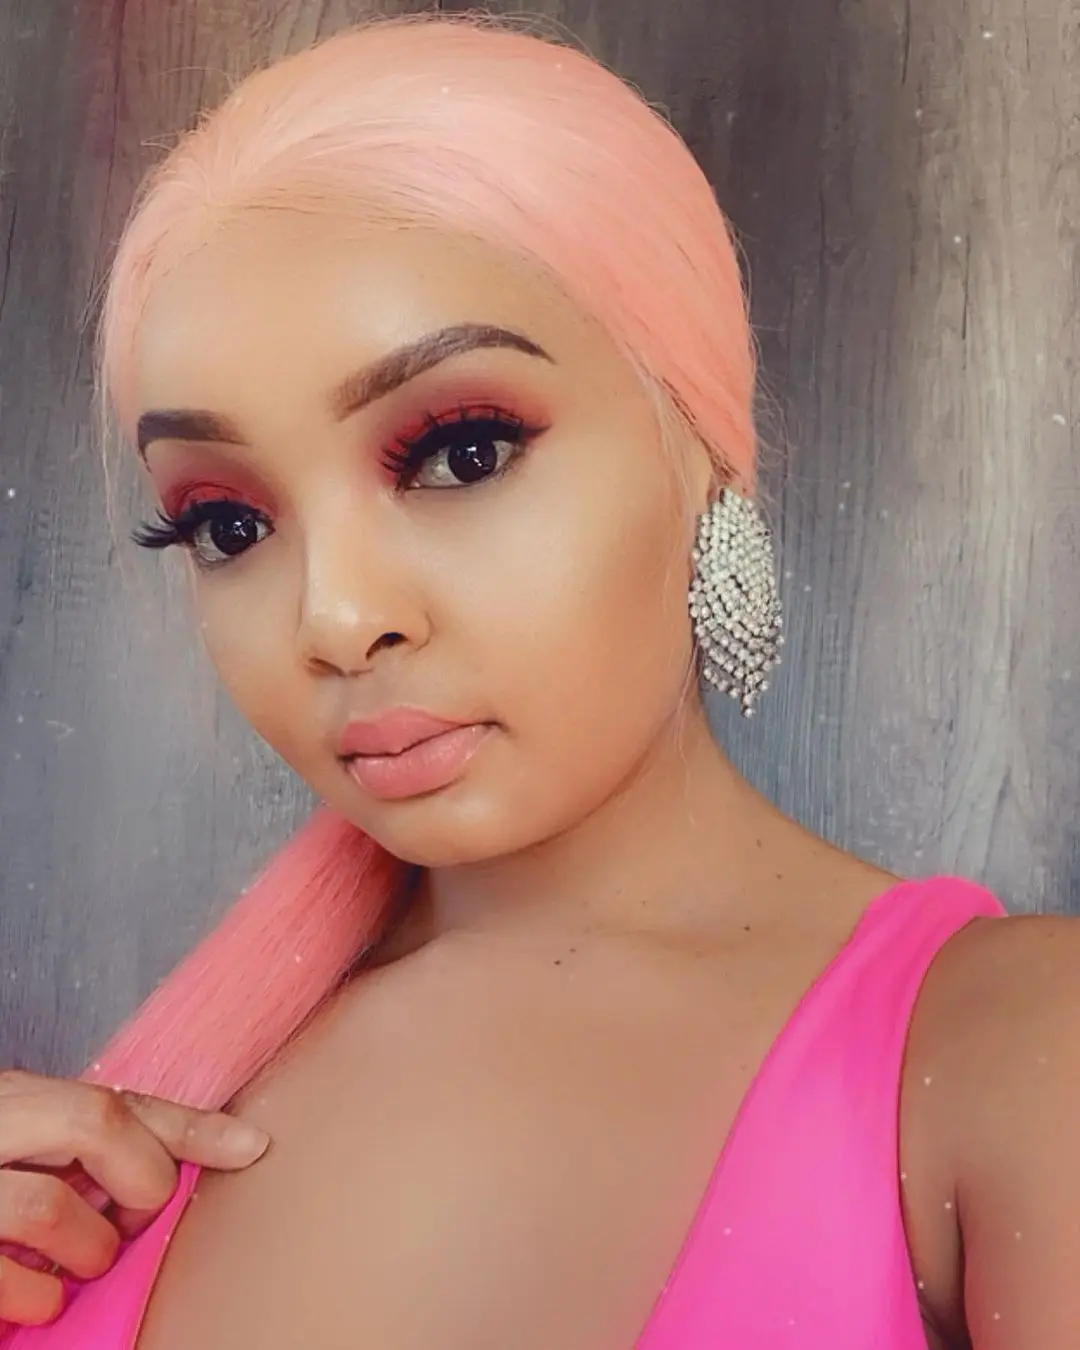 Pinkygirl mourns her father’s passing